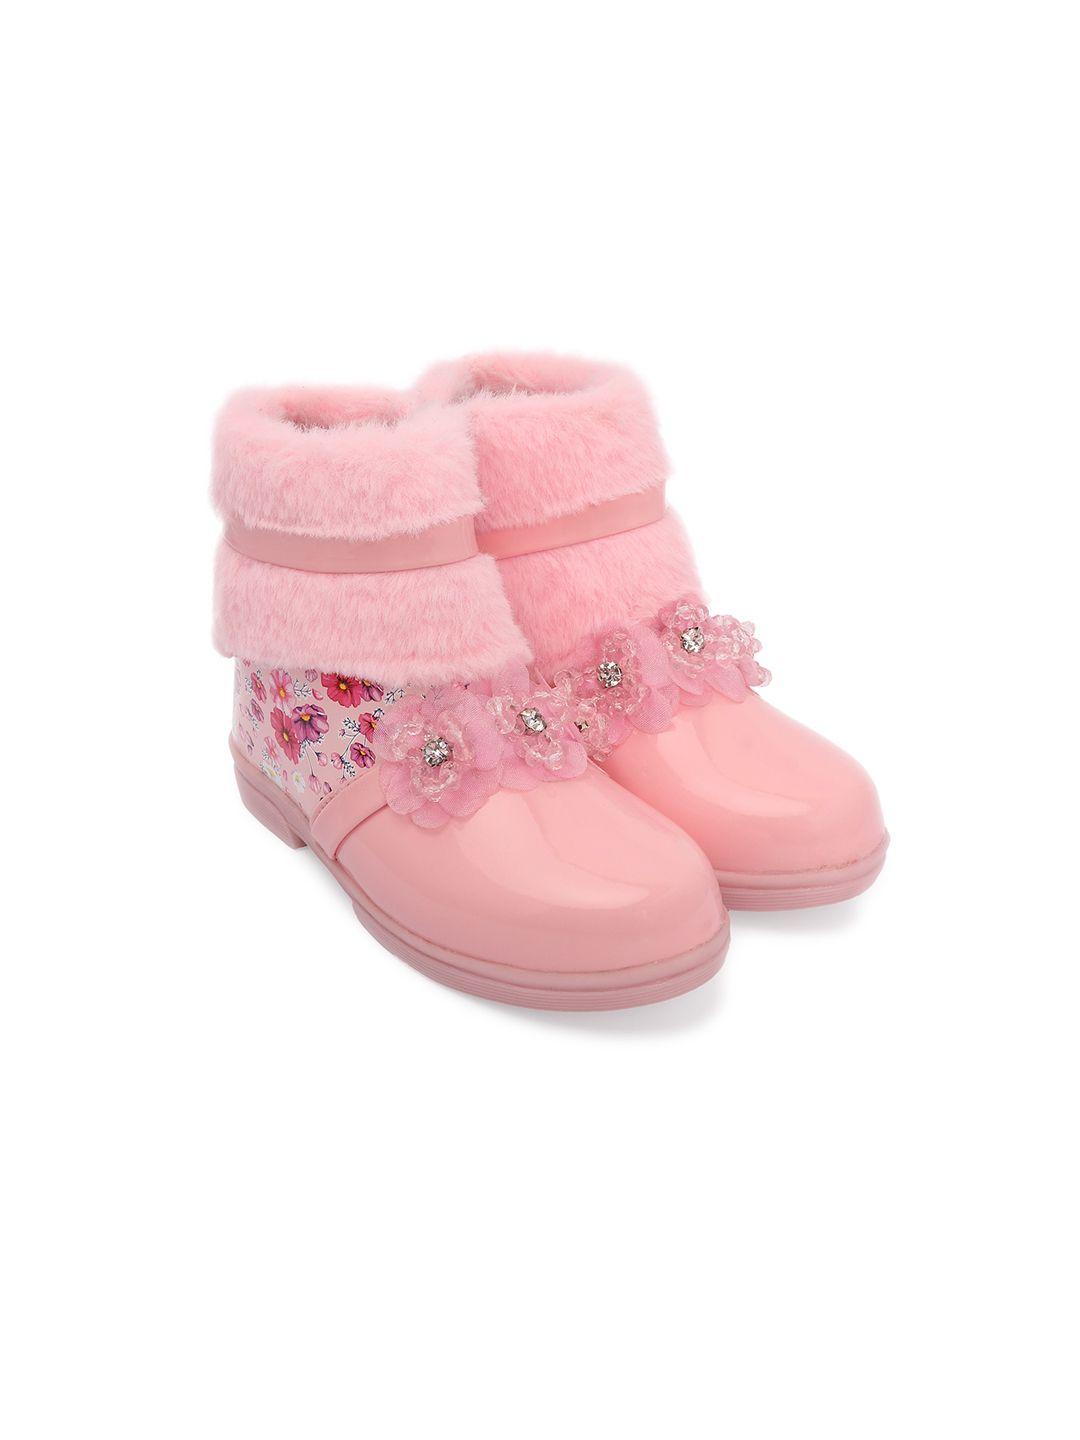 baesd-girls-printed-embellished-winter-boots